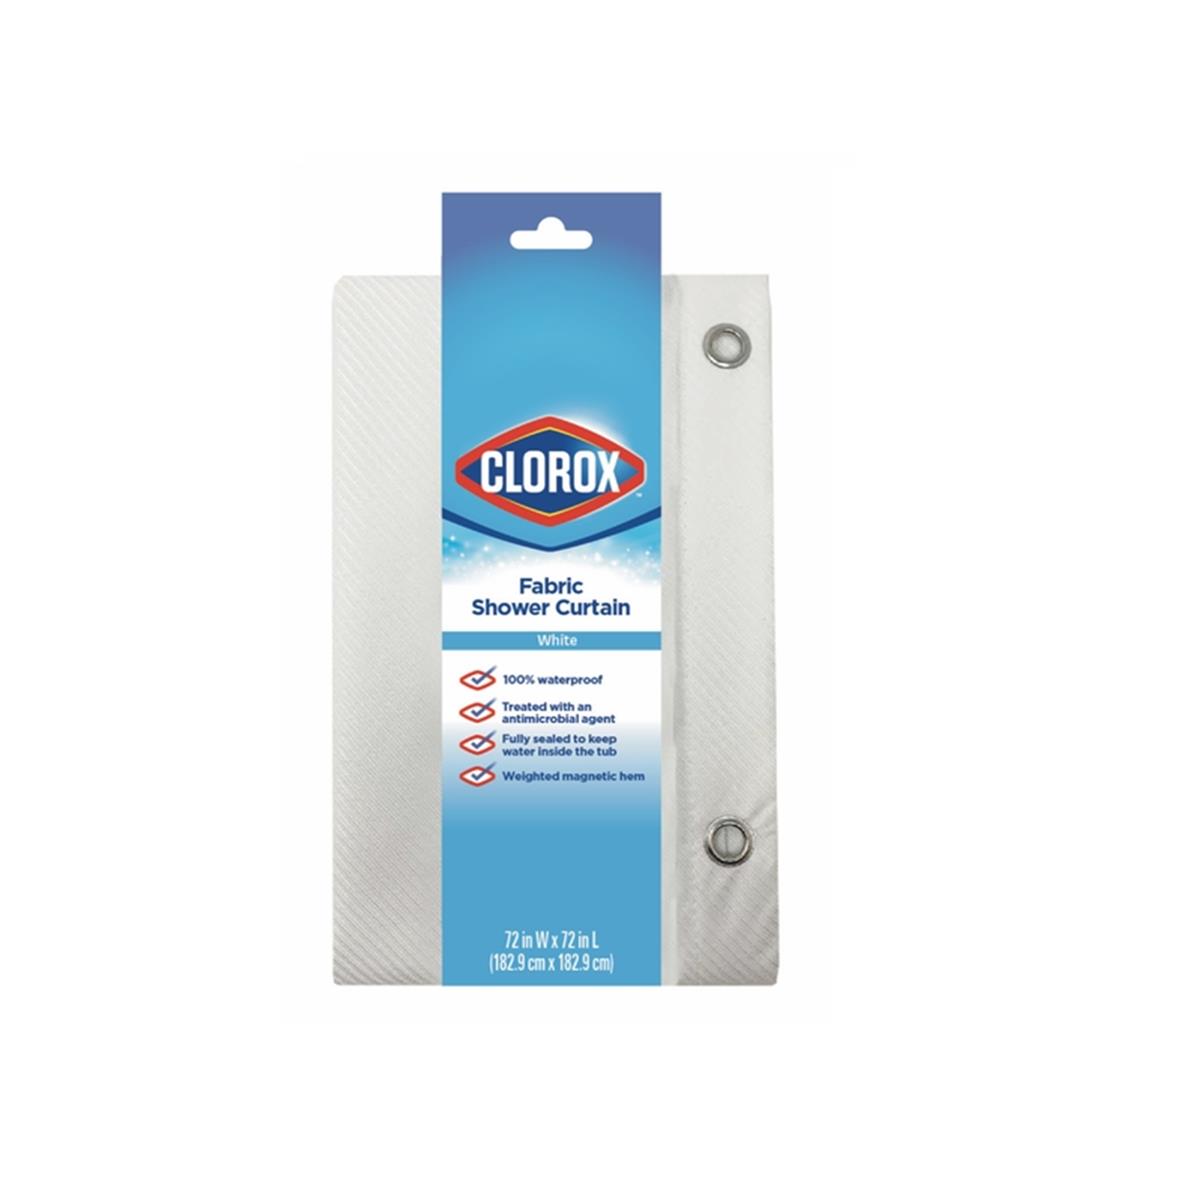 Picture of Clorox 4007813 72 in. White Fabric Shower Curtain Liner